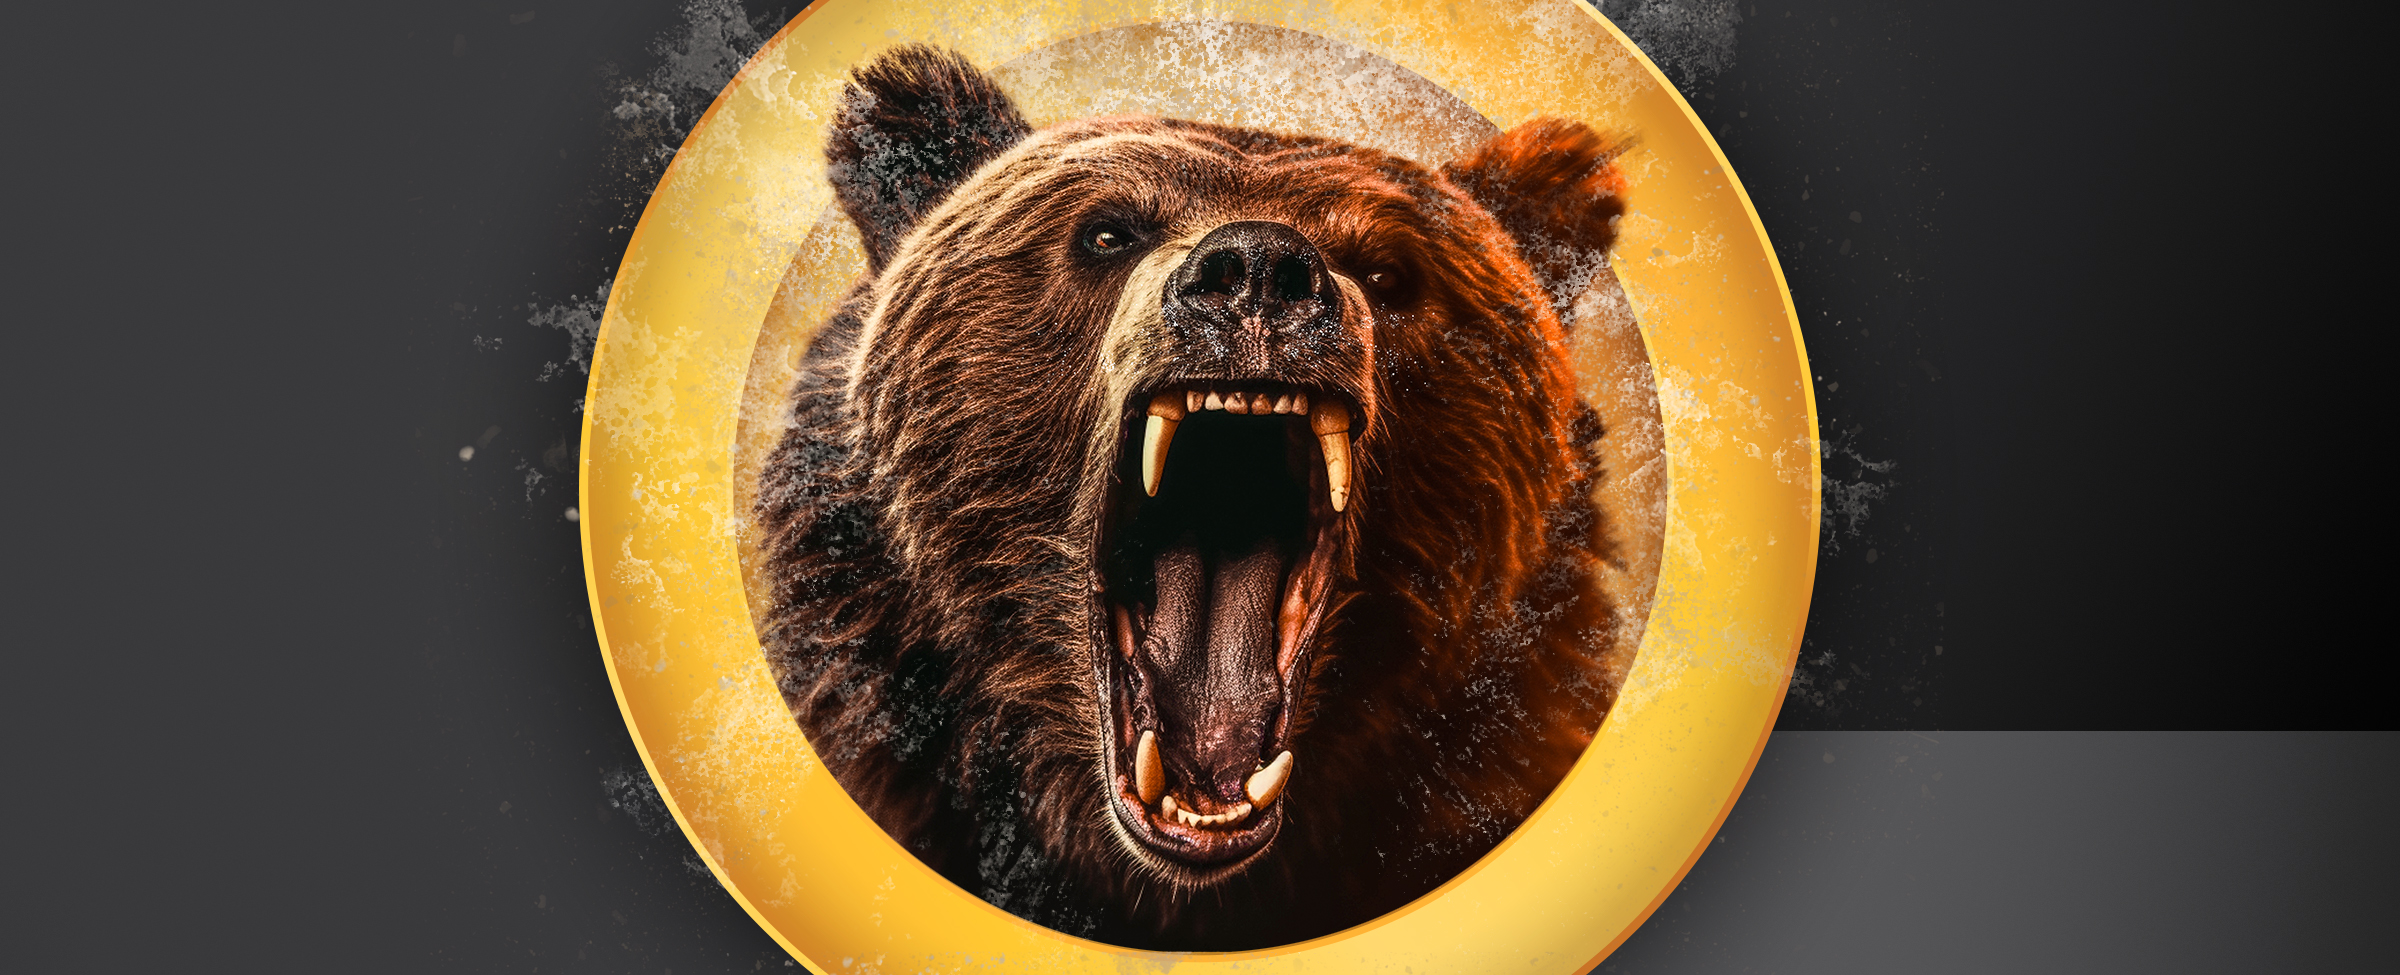 A grizzly bear sticks its head through a yellow portal against a grey background.